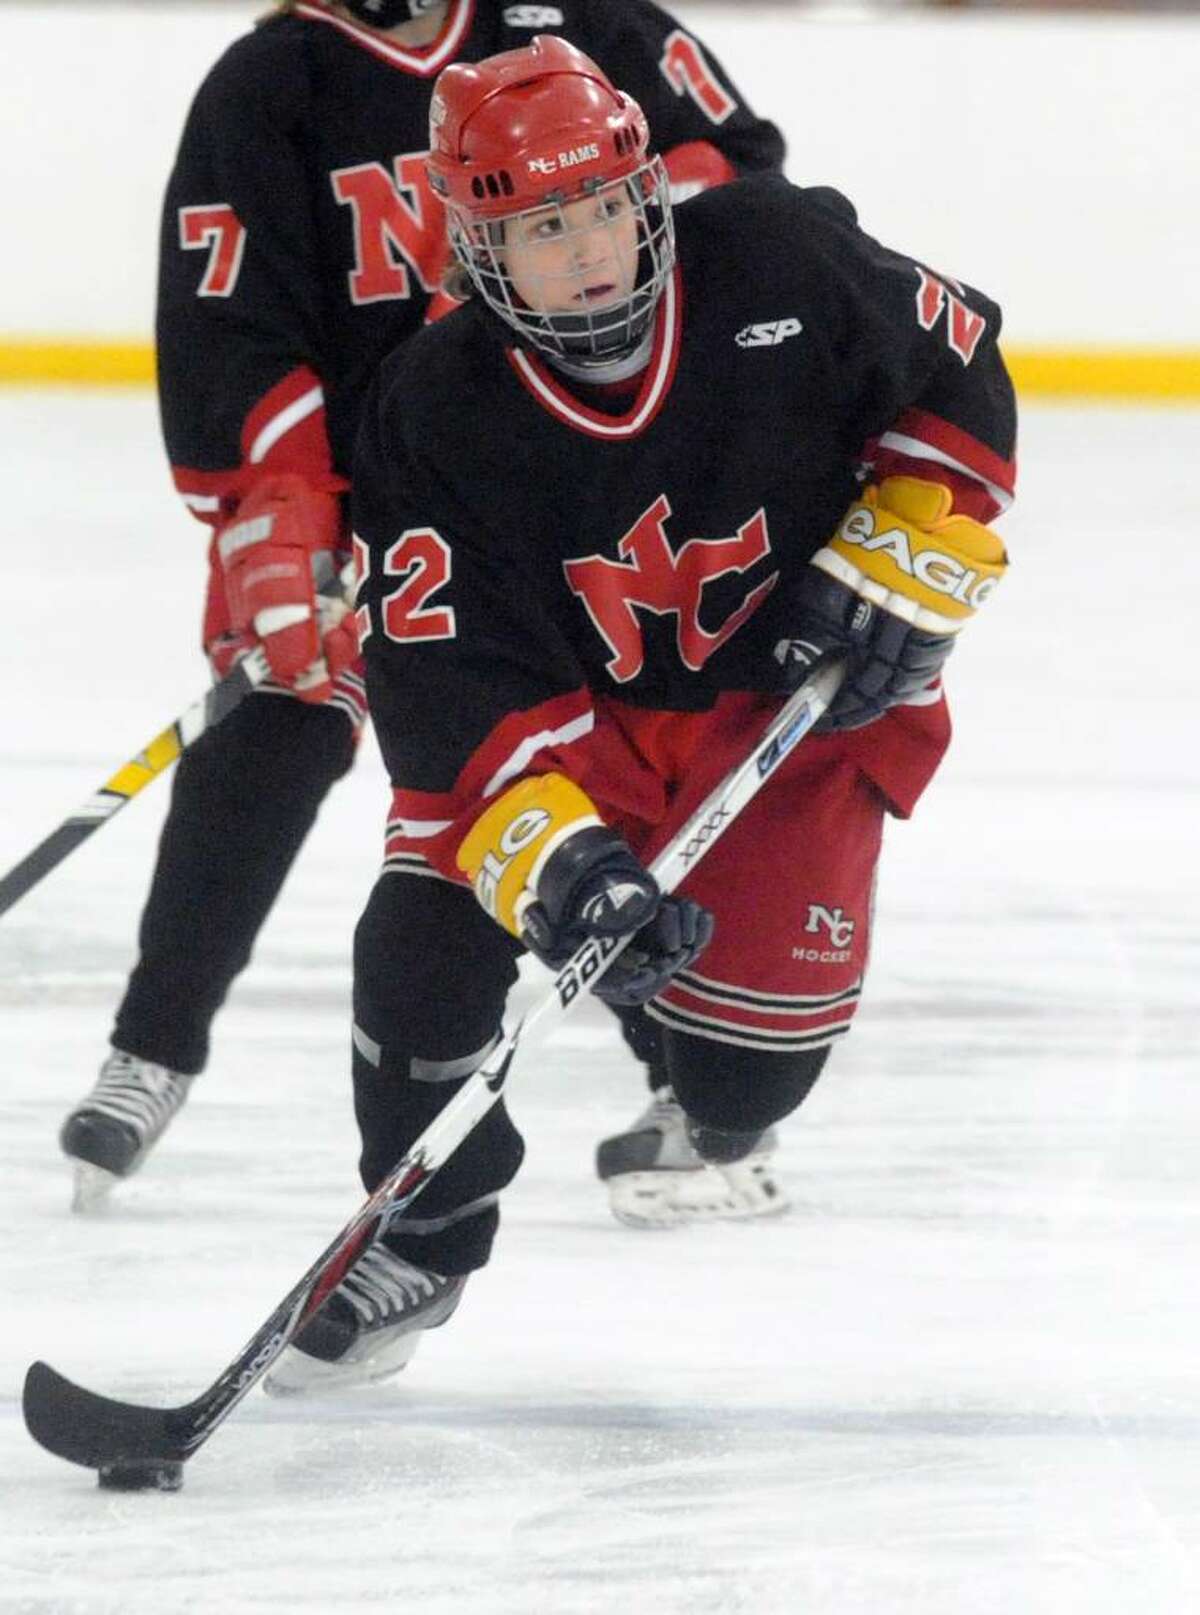 New Canaan's Olivia Hompe breaks away as Greenwich High hosts New Canaan in a girls hockey game at Dorothy Hamill Saturday afternoon, January 16, 2010.